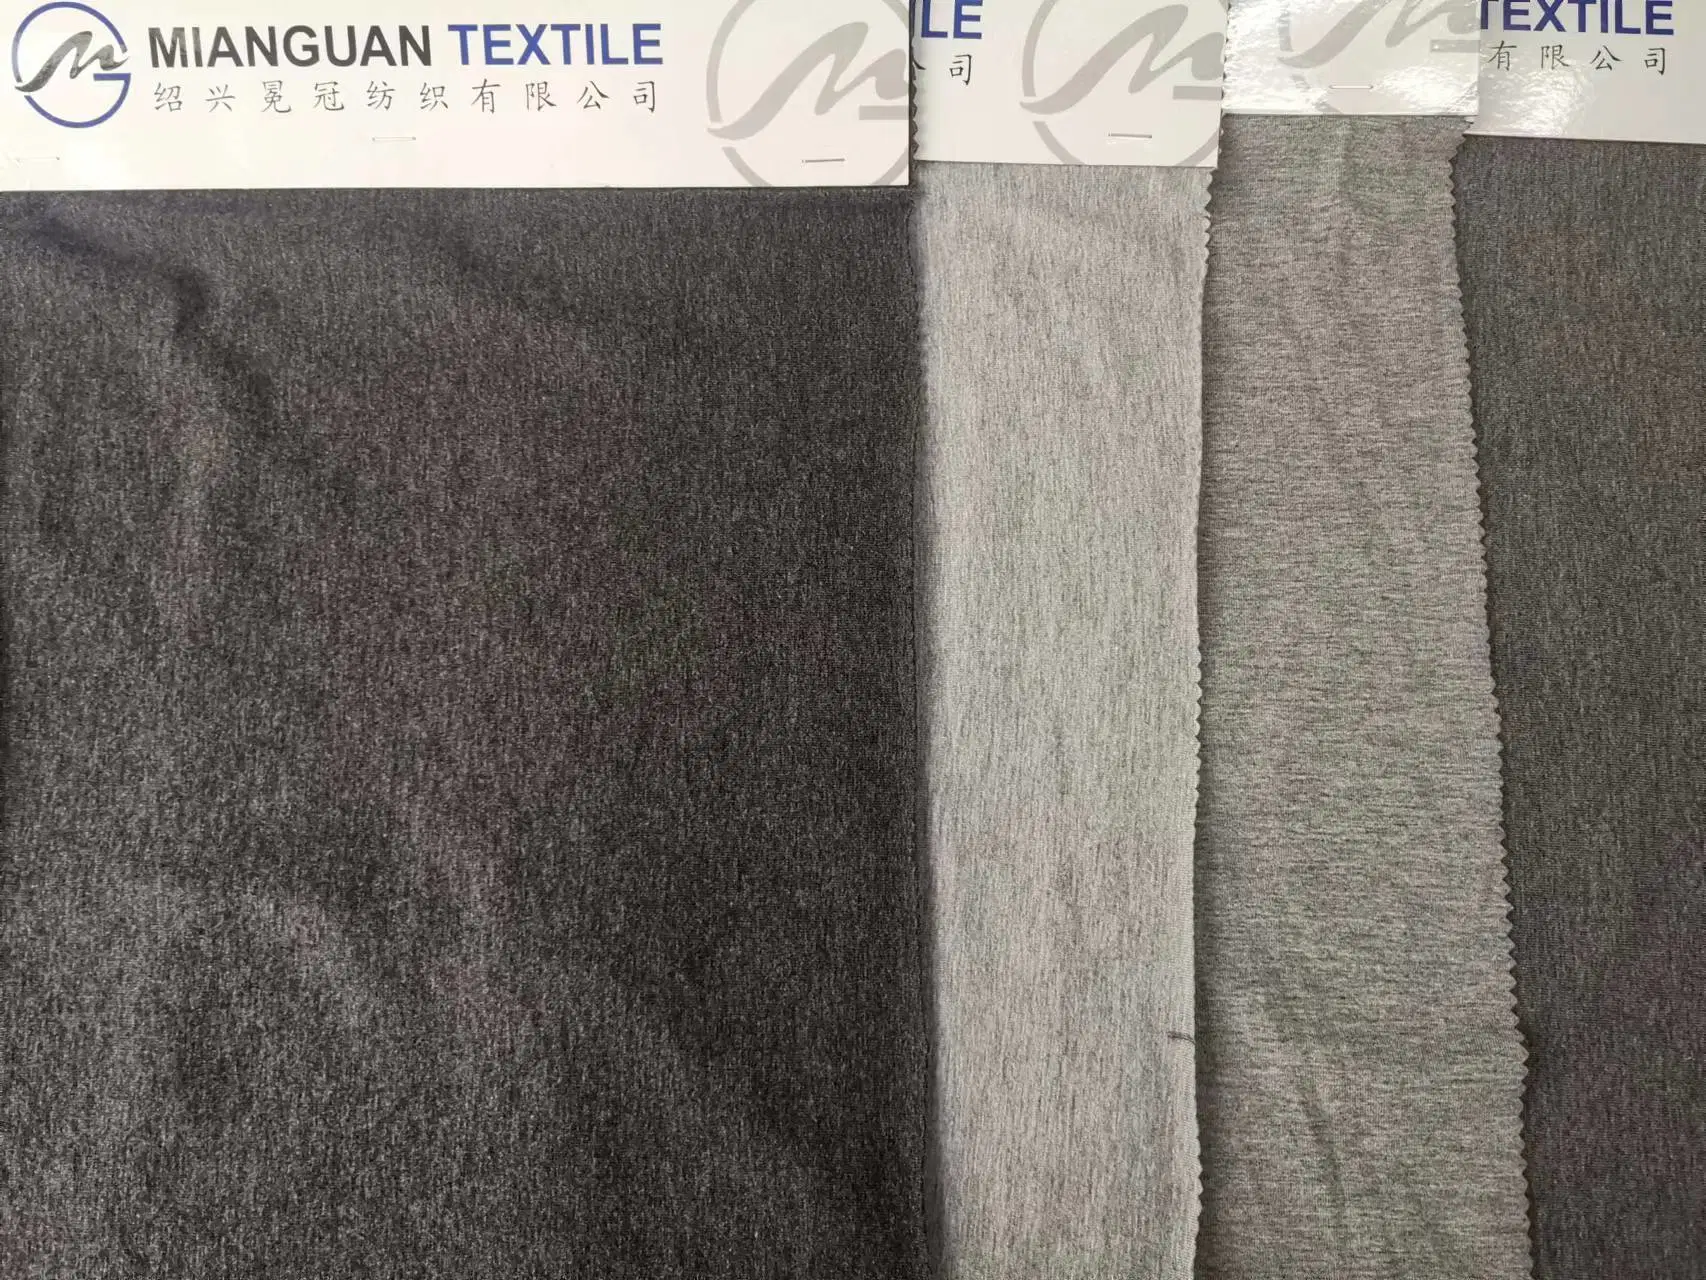 Wholesale/Supplier Single Jersey 65% Polyester 35% Cotton with Spandex Tc Knitting Melange Style Fabric for Sportswear